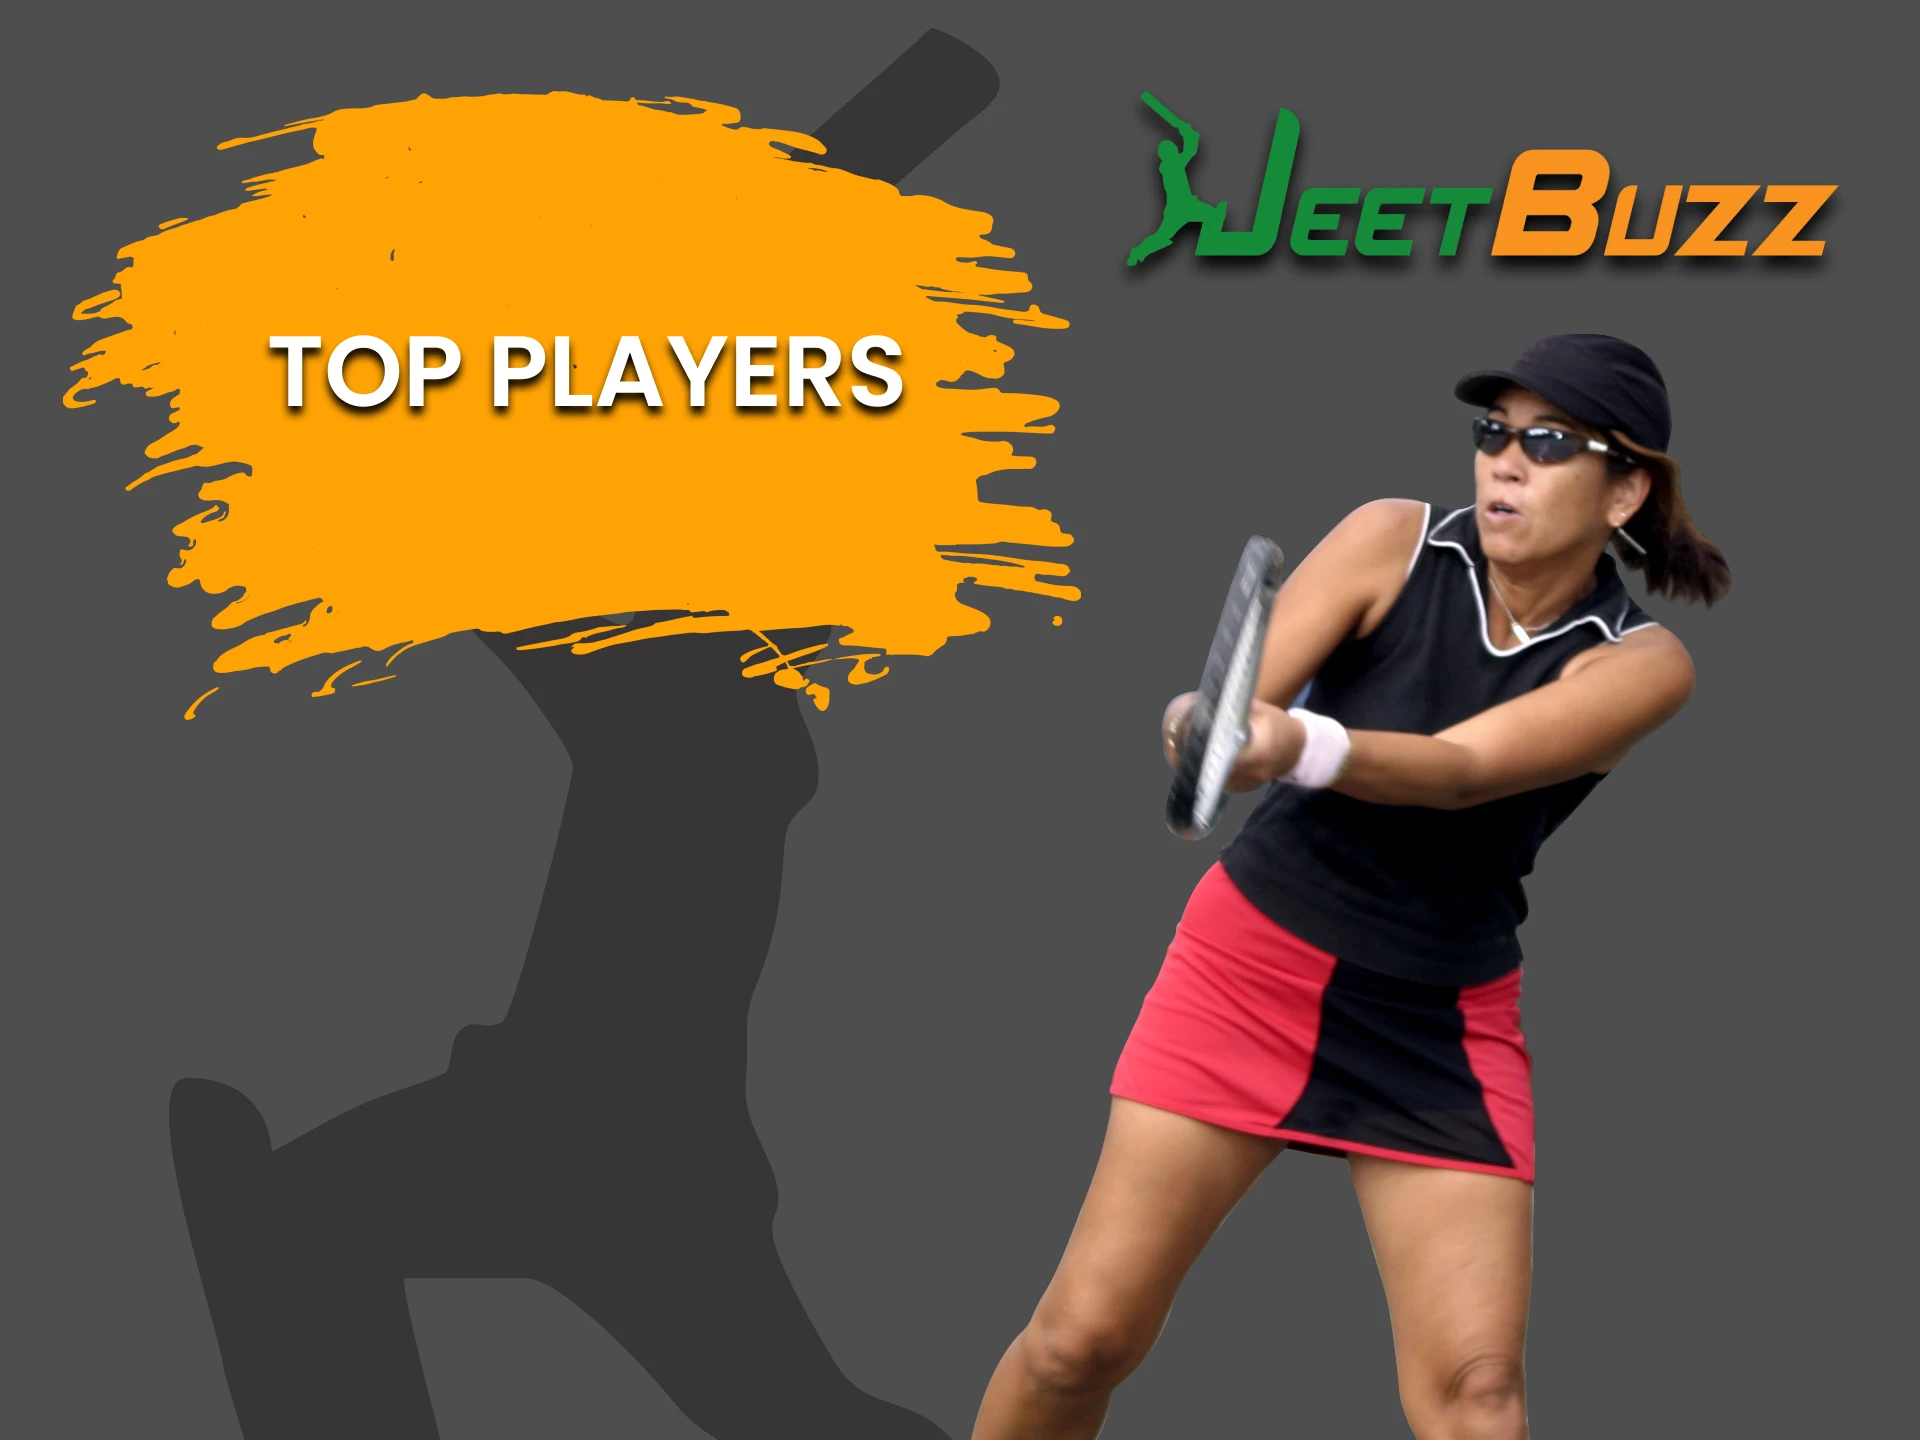 We feature the best tennis players on JeetBuzz.